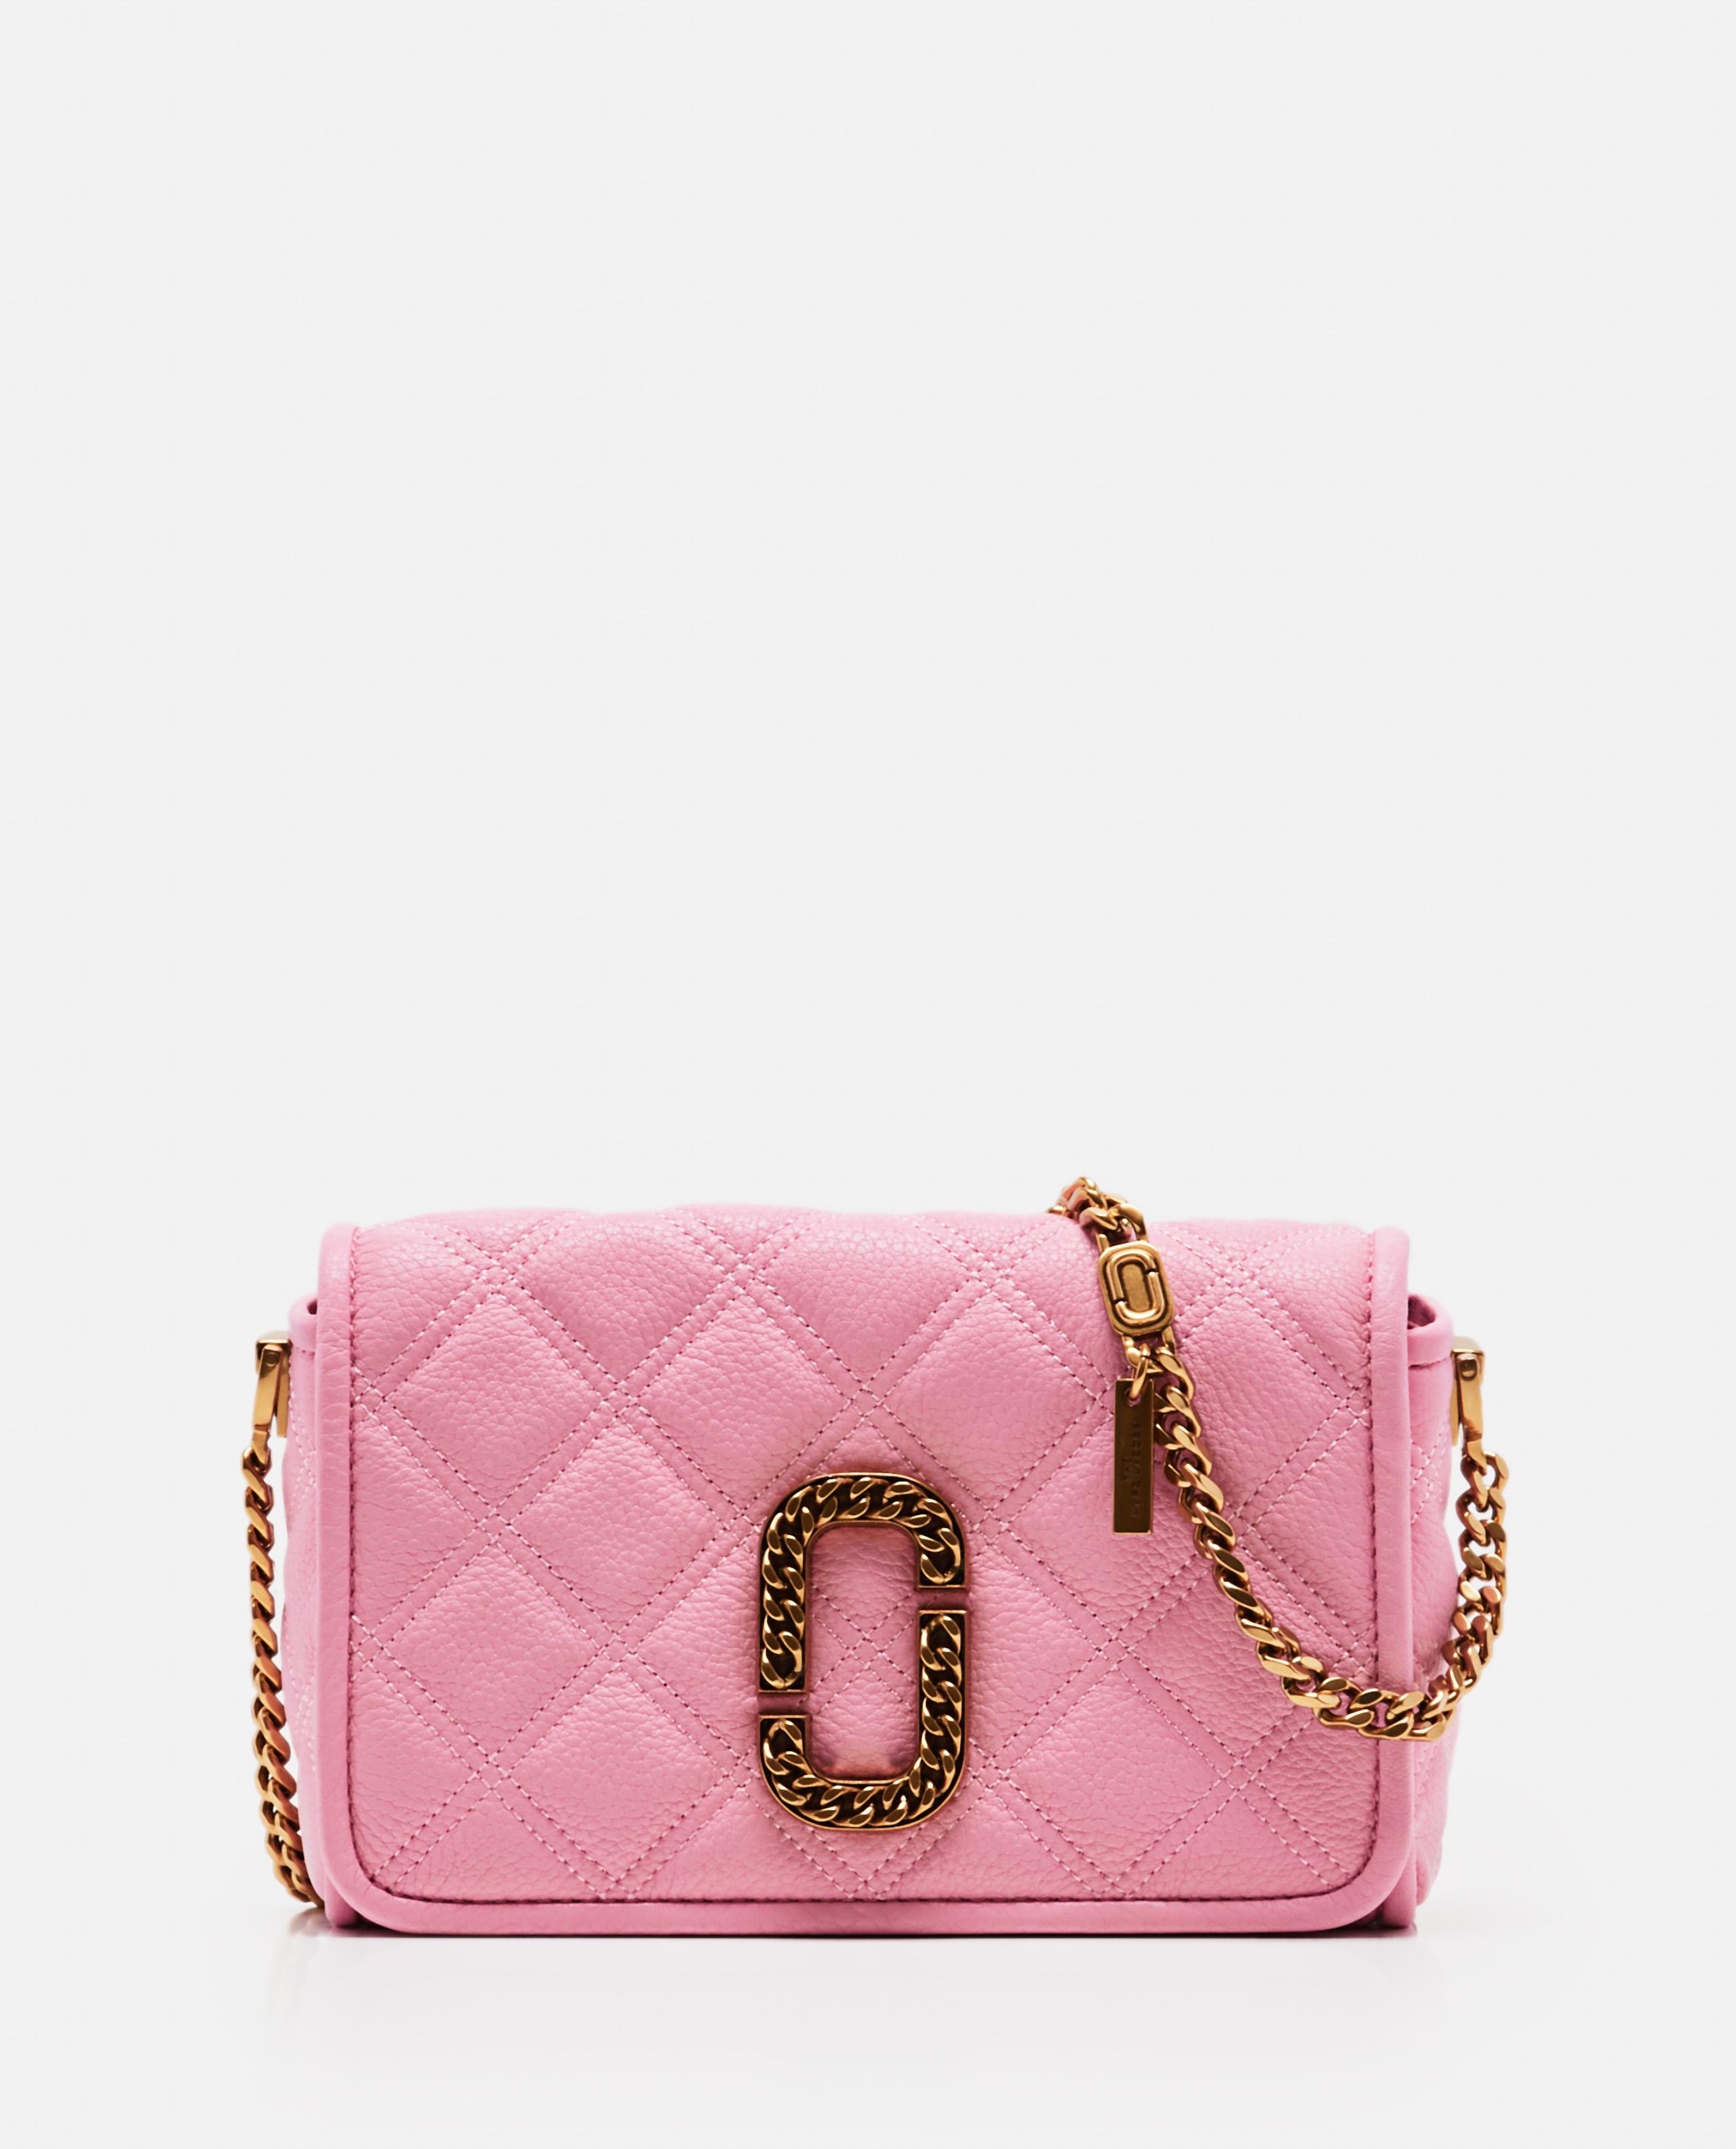 Marc Jacobs Leather The Status Crossbody Flap Bag in Pink (Black) - Lyst